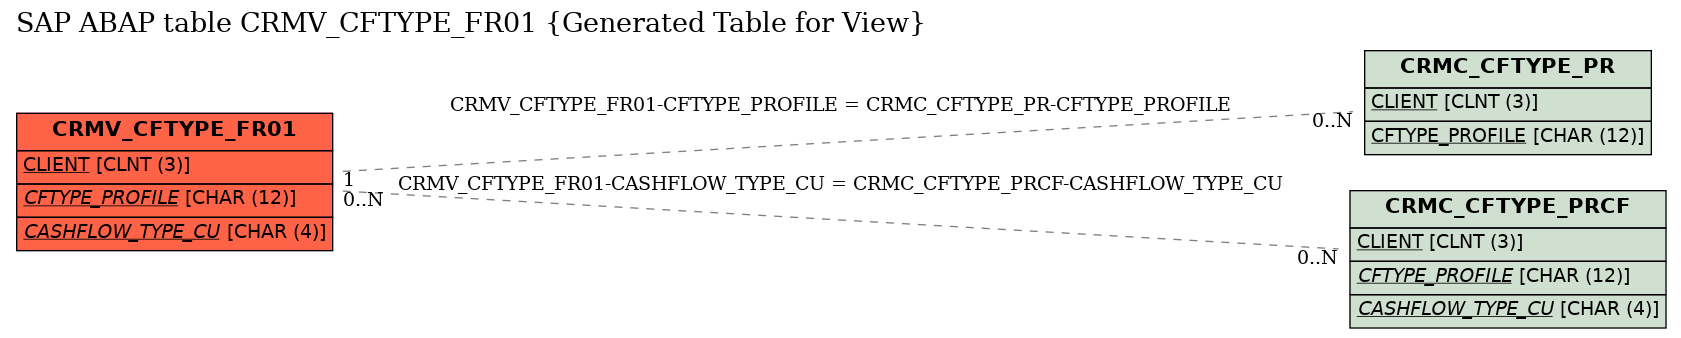 E-R Diagram for table CRMV_CFTYPE_FR01 (Generated Table for View)